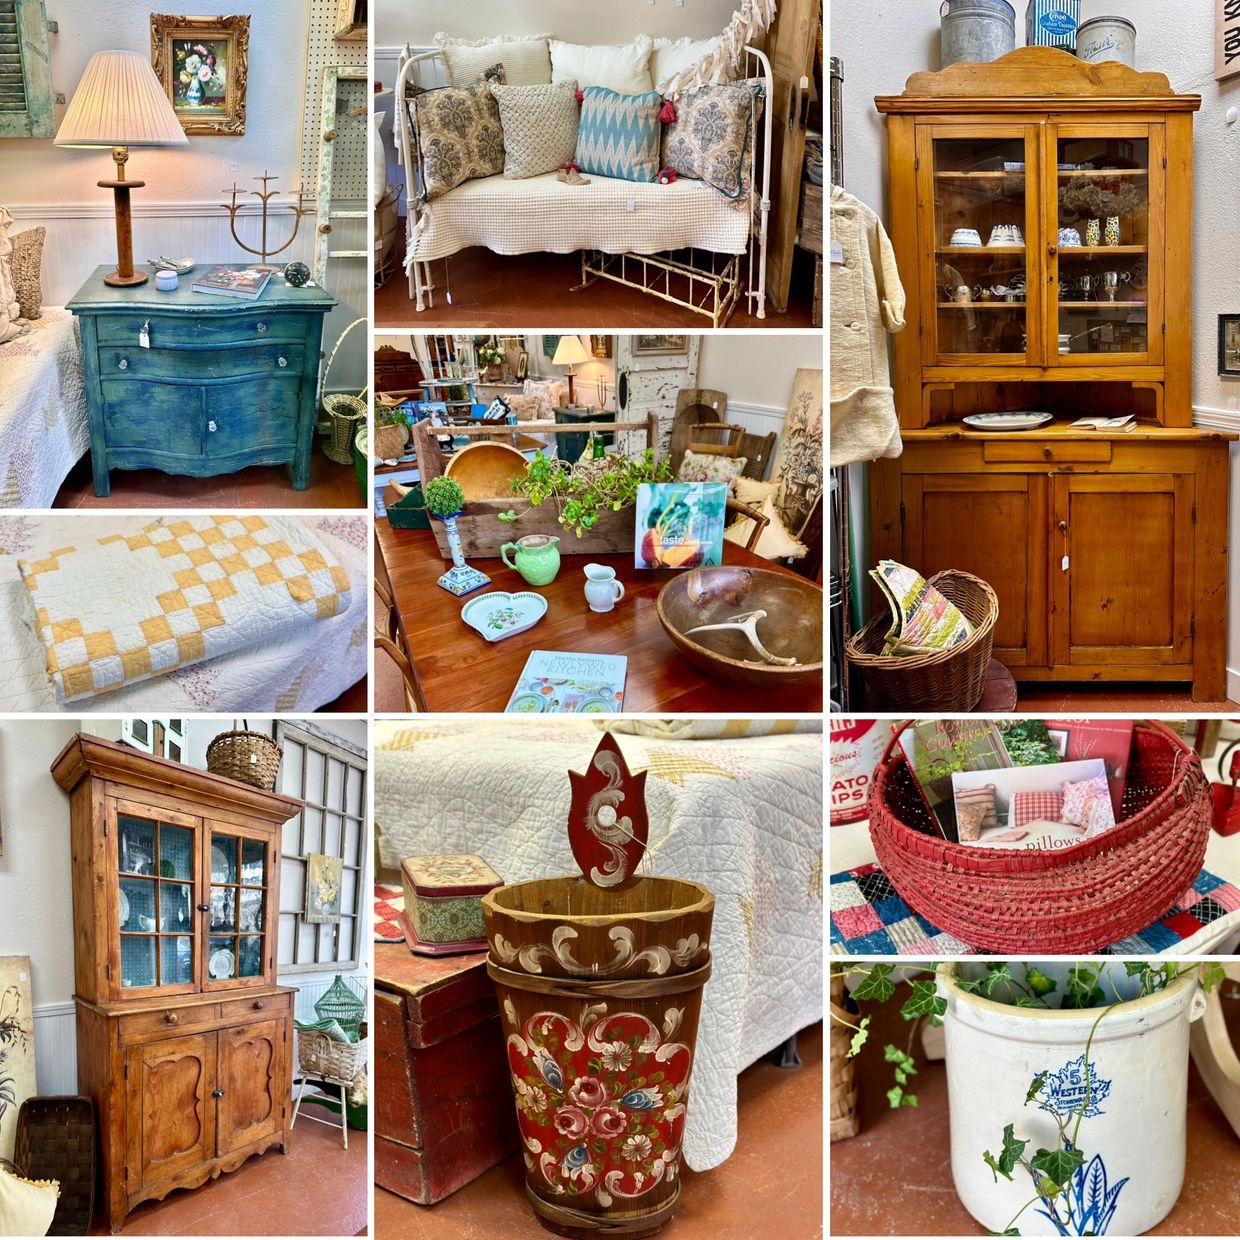 The Top 11 Locally-Owned Furniture and Decor Shops in the Boise Area